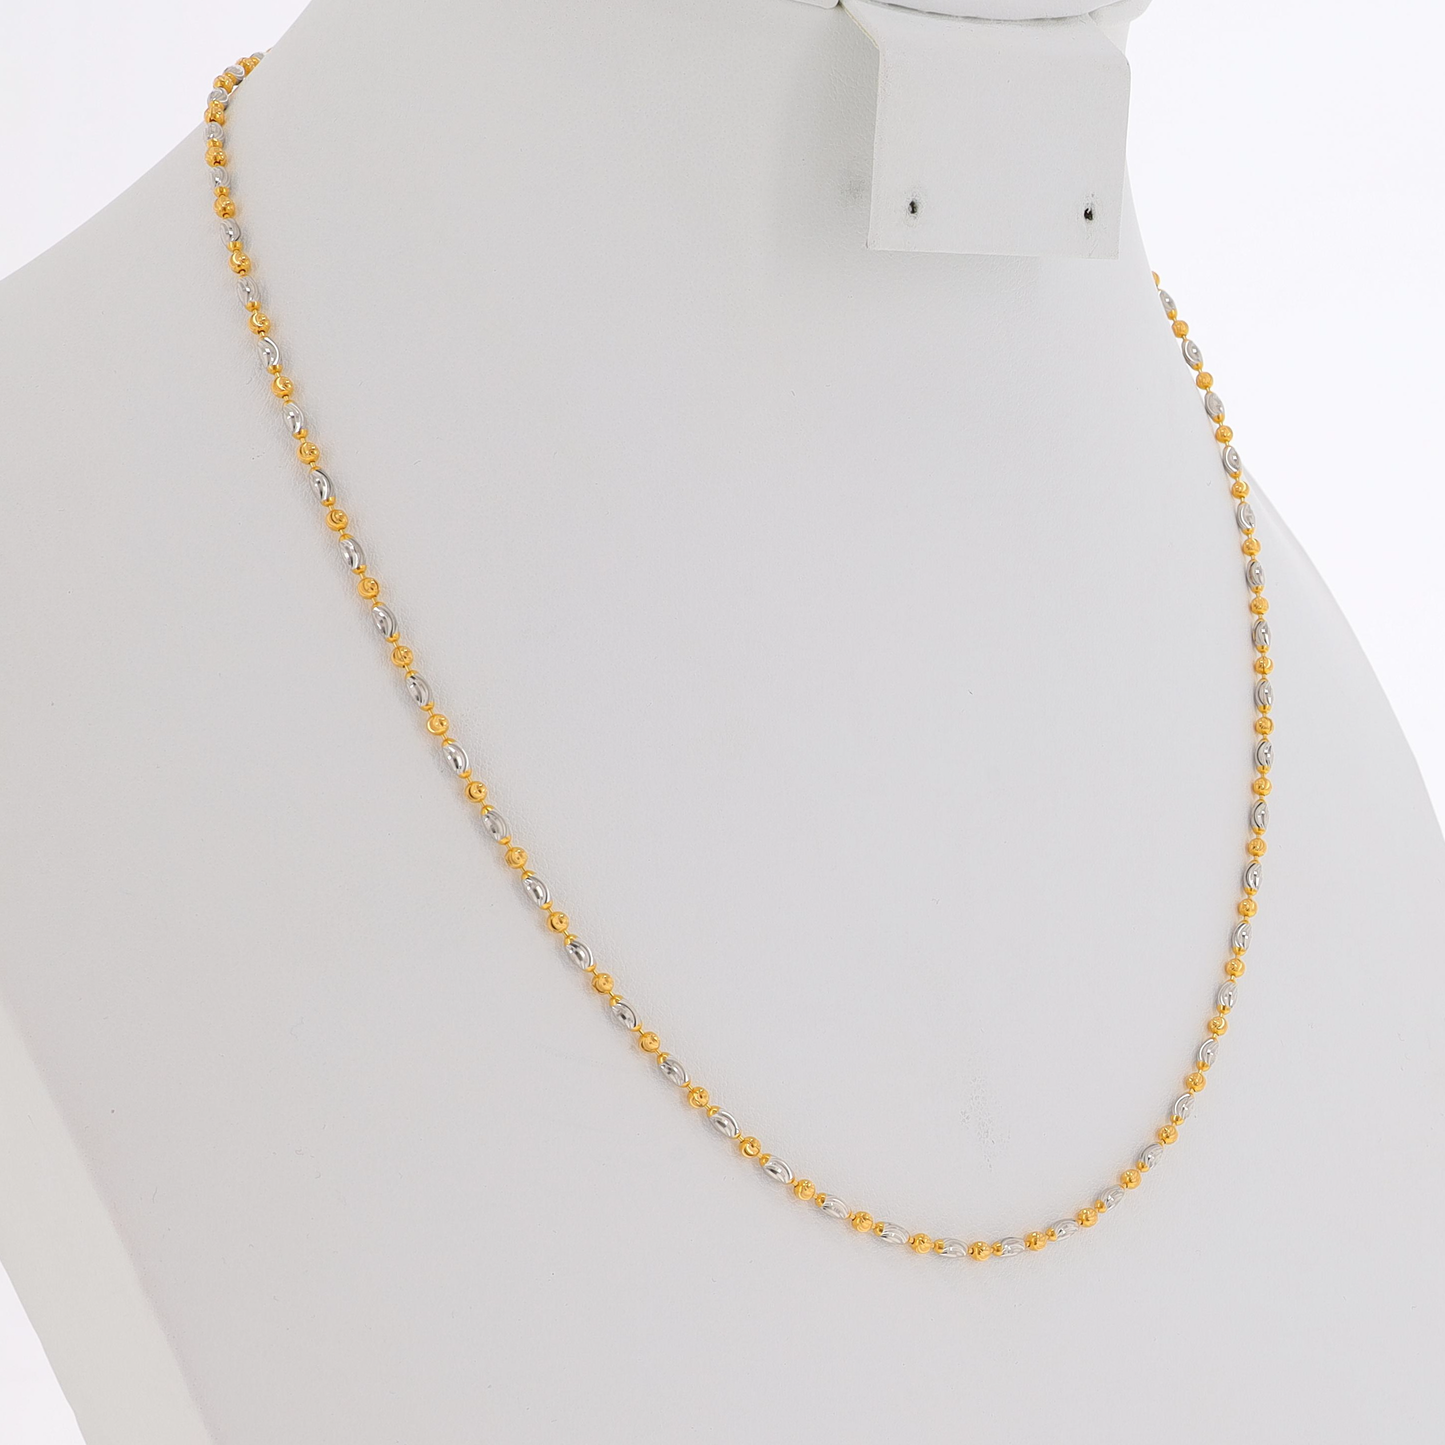 GOLD BEADS CHAIN